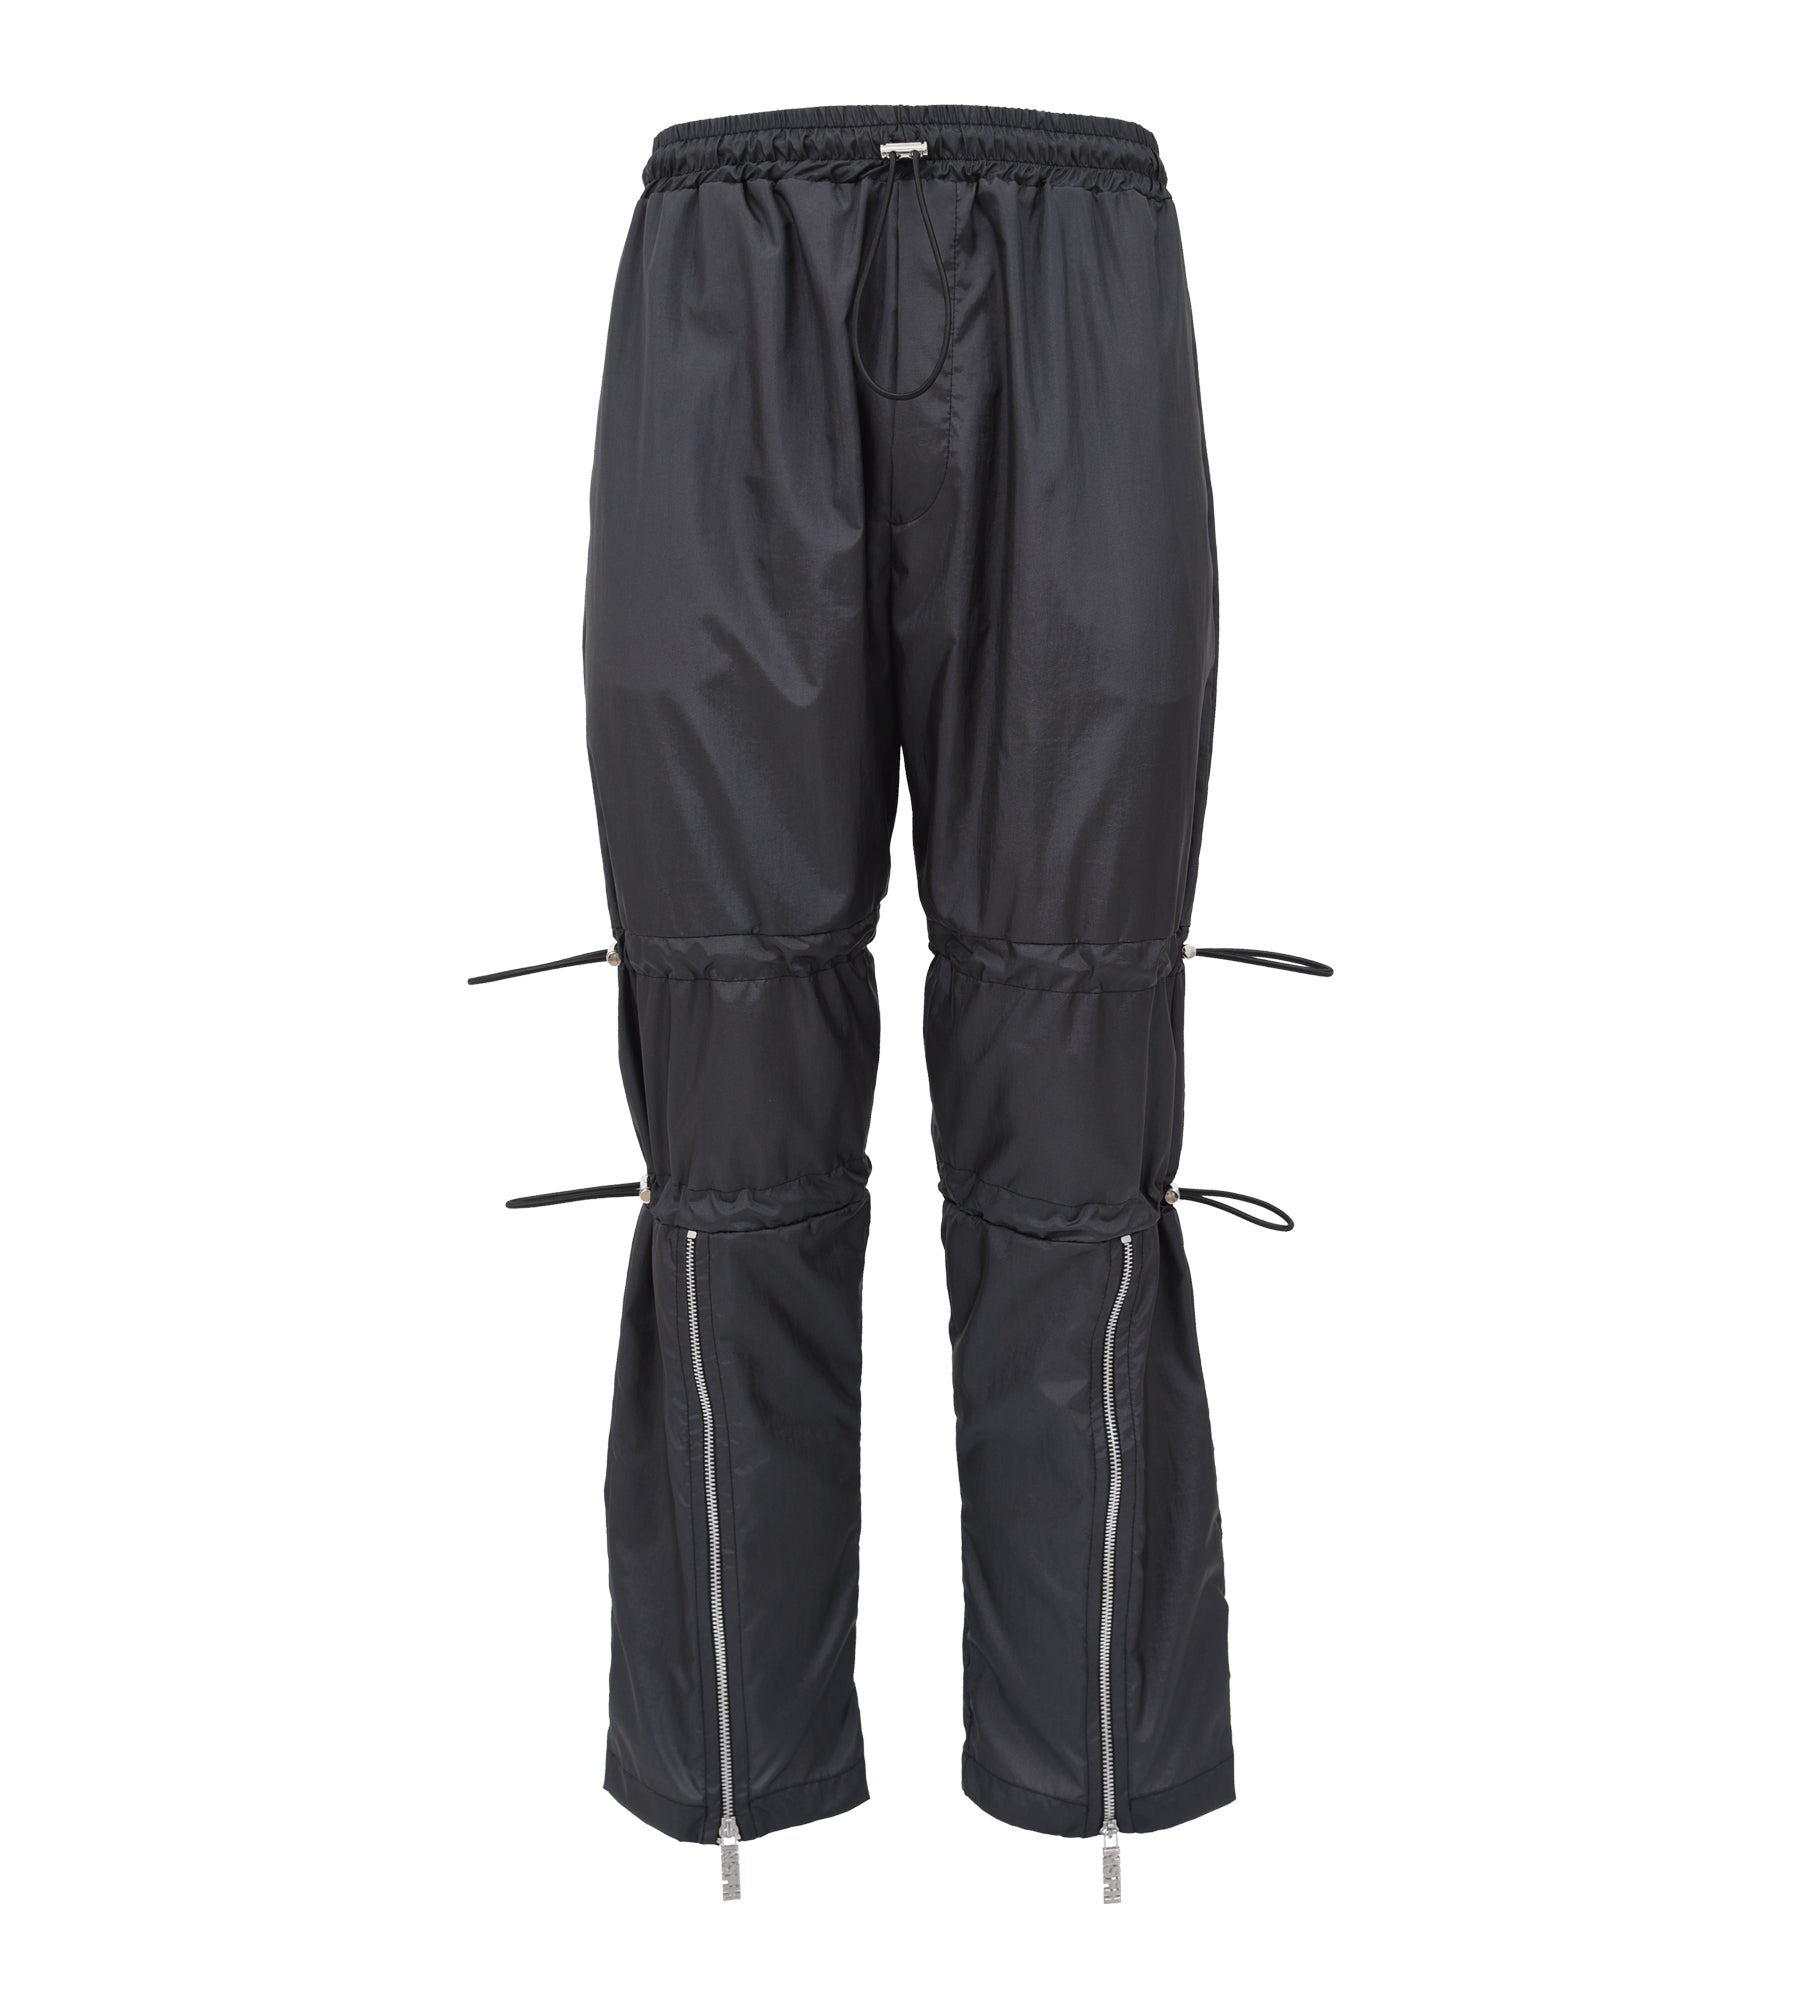 Grey nylon pants – NOT SAFE FOR HUMANS